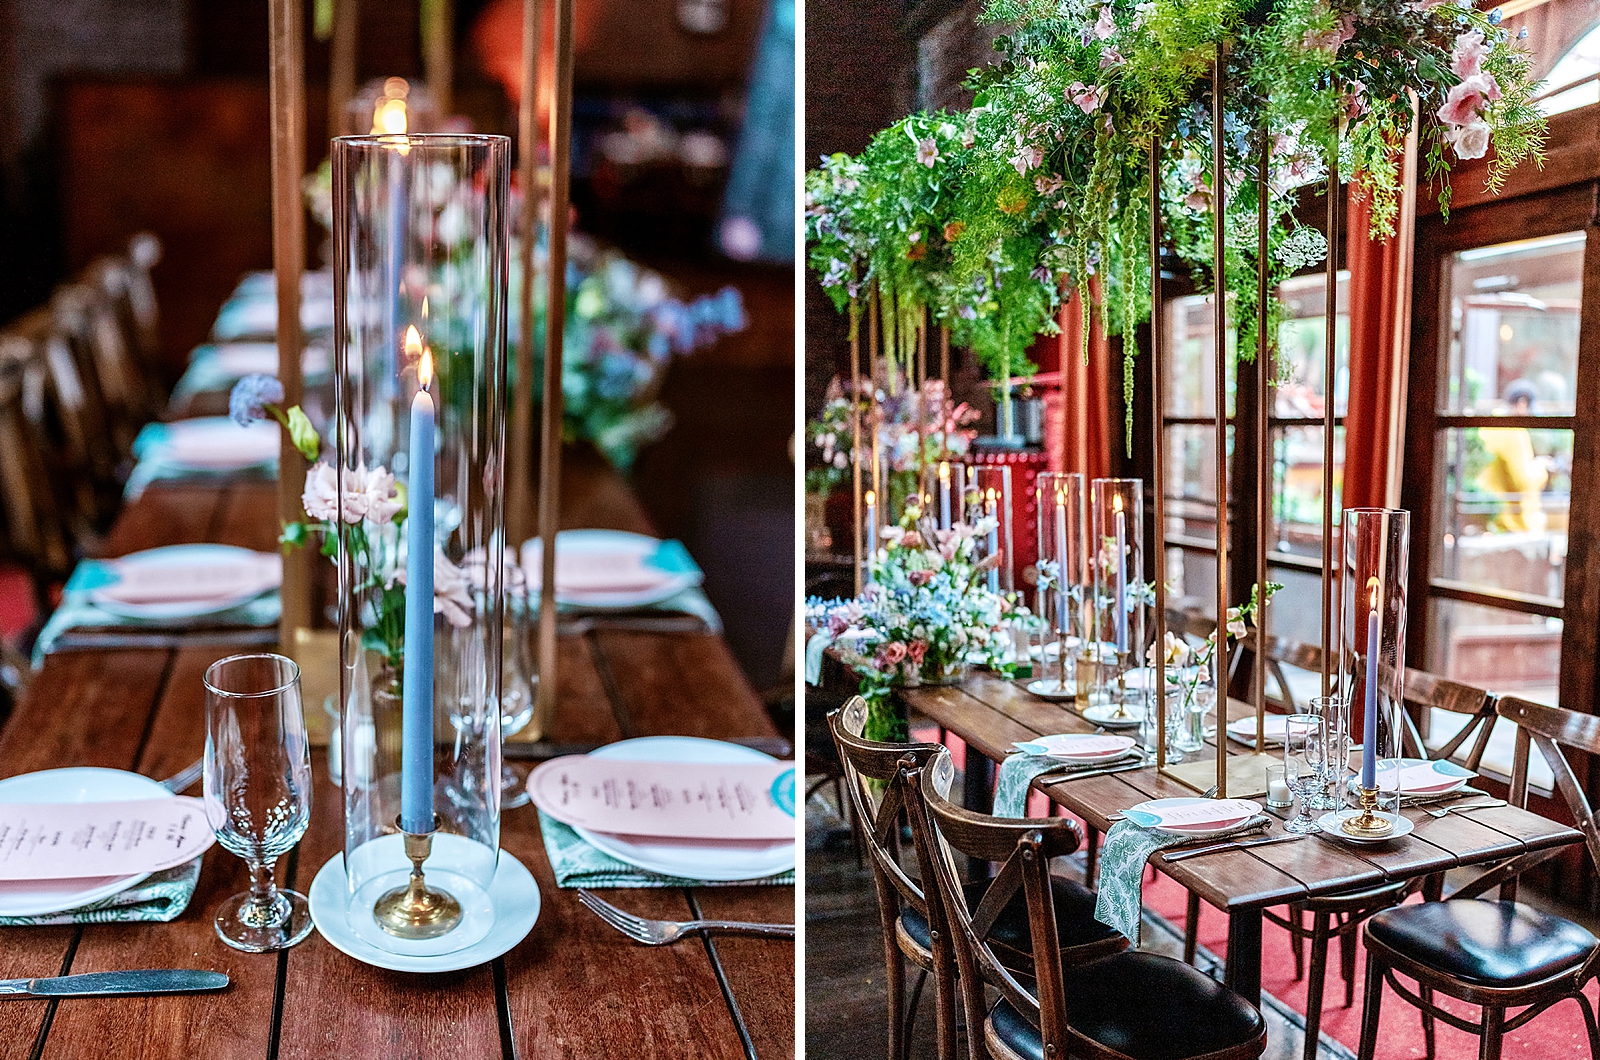 Left photo: Close up shot of the reception table details.
Right photo: Shot of the reception table and florals. 